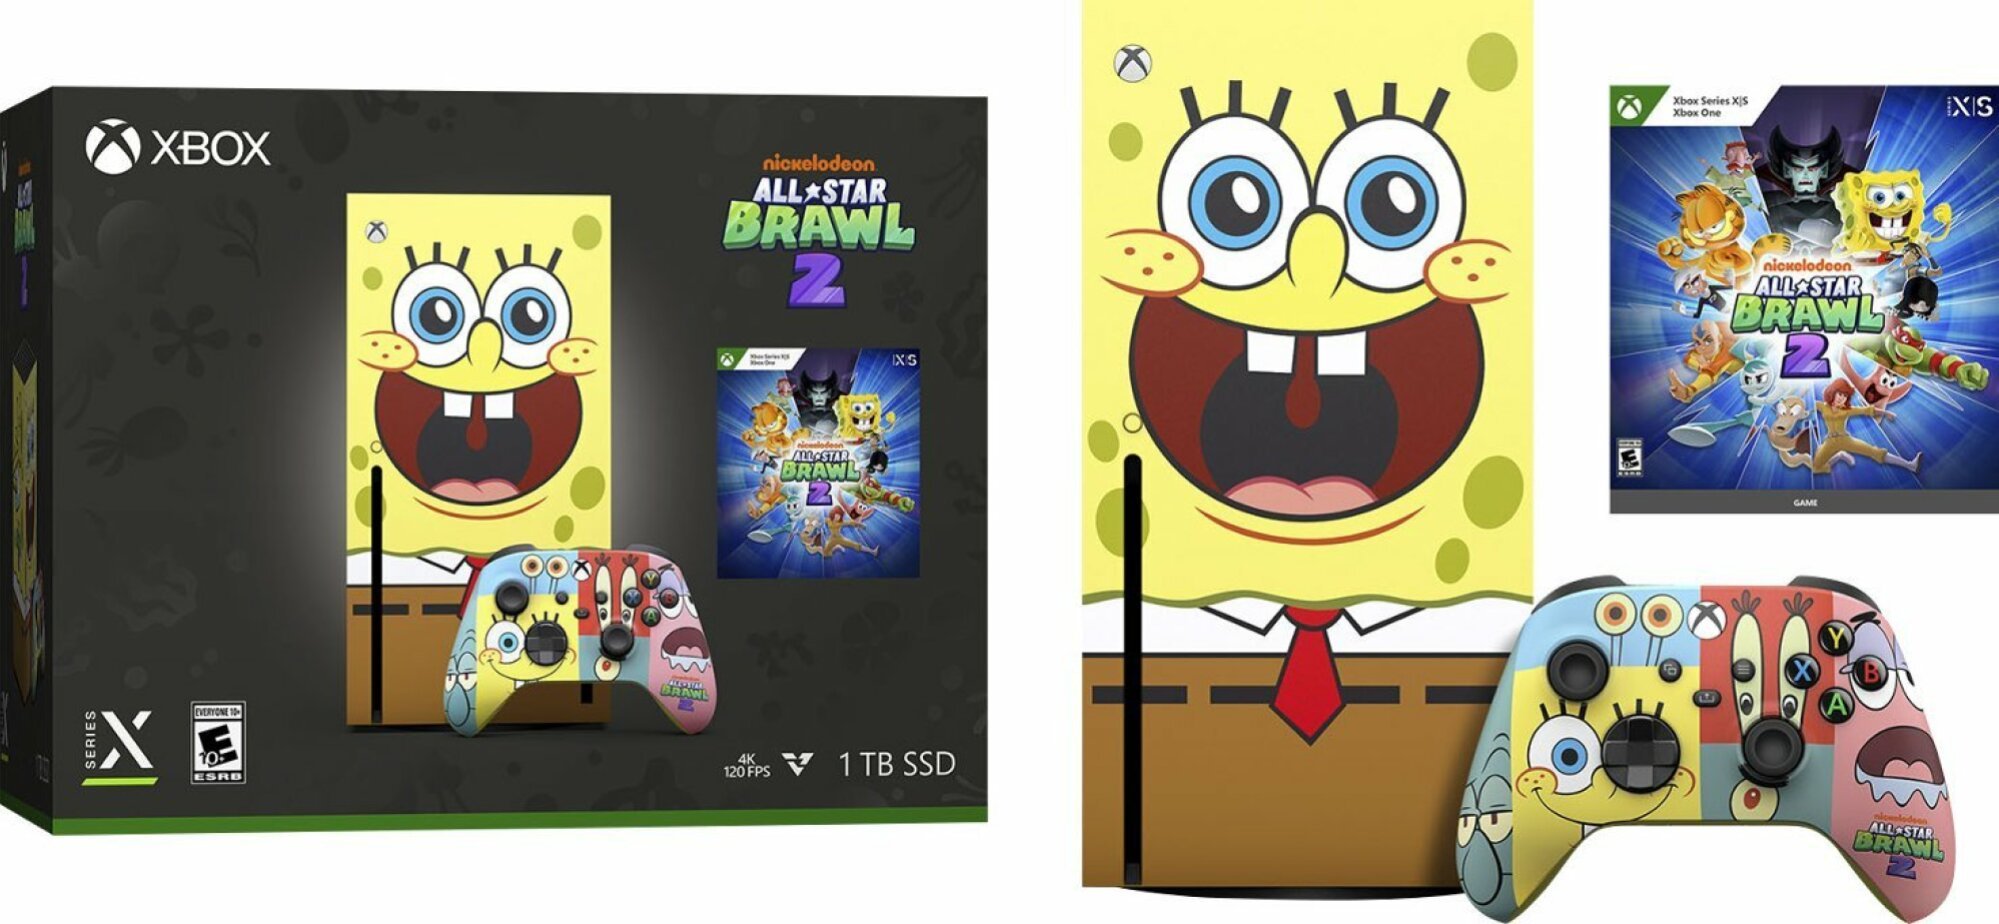 le pack édition spéciale Xbox Series X « Nickelodeon All-Star Brawl 2 »